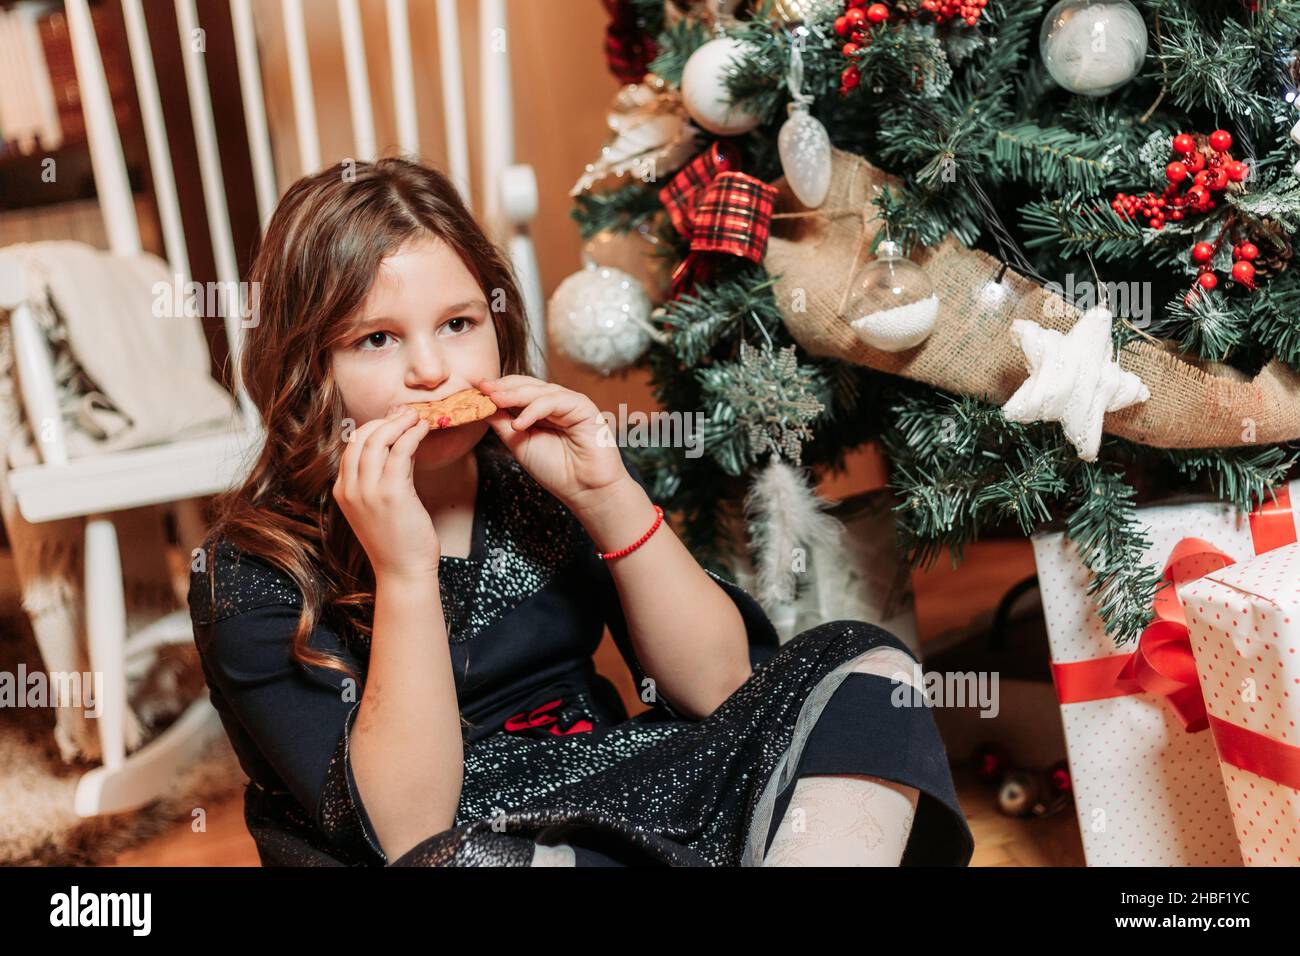 Cute chubby girl eating ginger cookies next to a Christmas tree Stock Photo